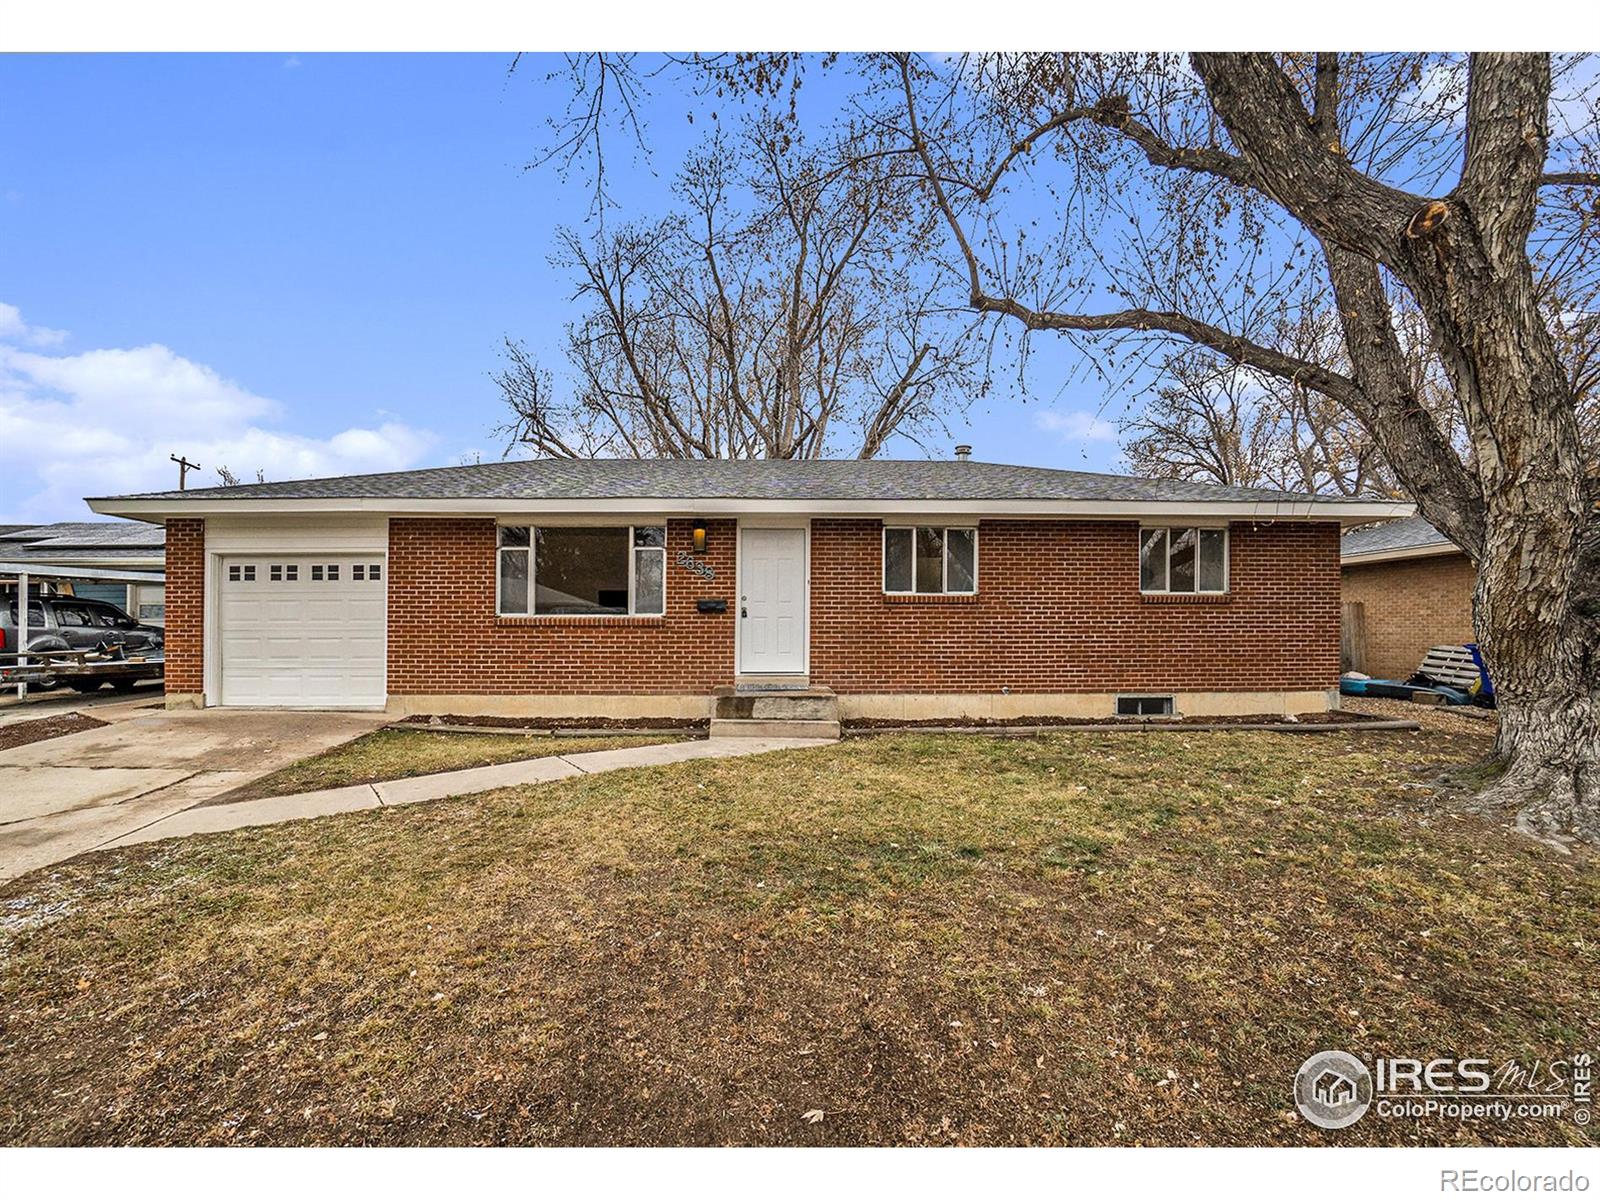 2638  15th Avenue, greeley MLS: 4567891000670 Beds: 4 Baths: 3 Price: $375,000